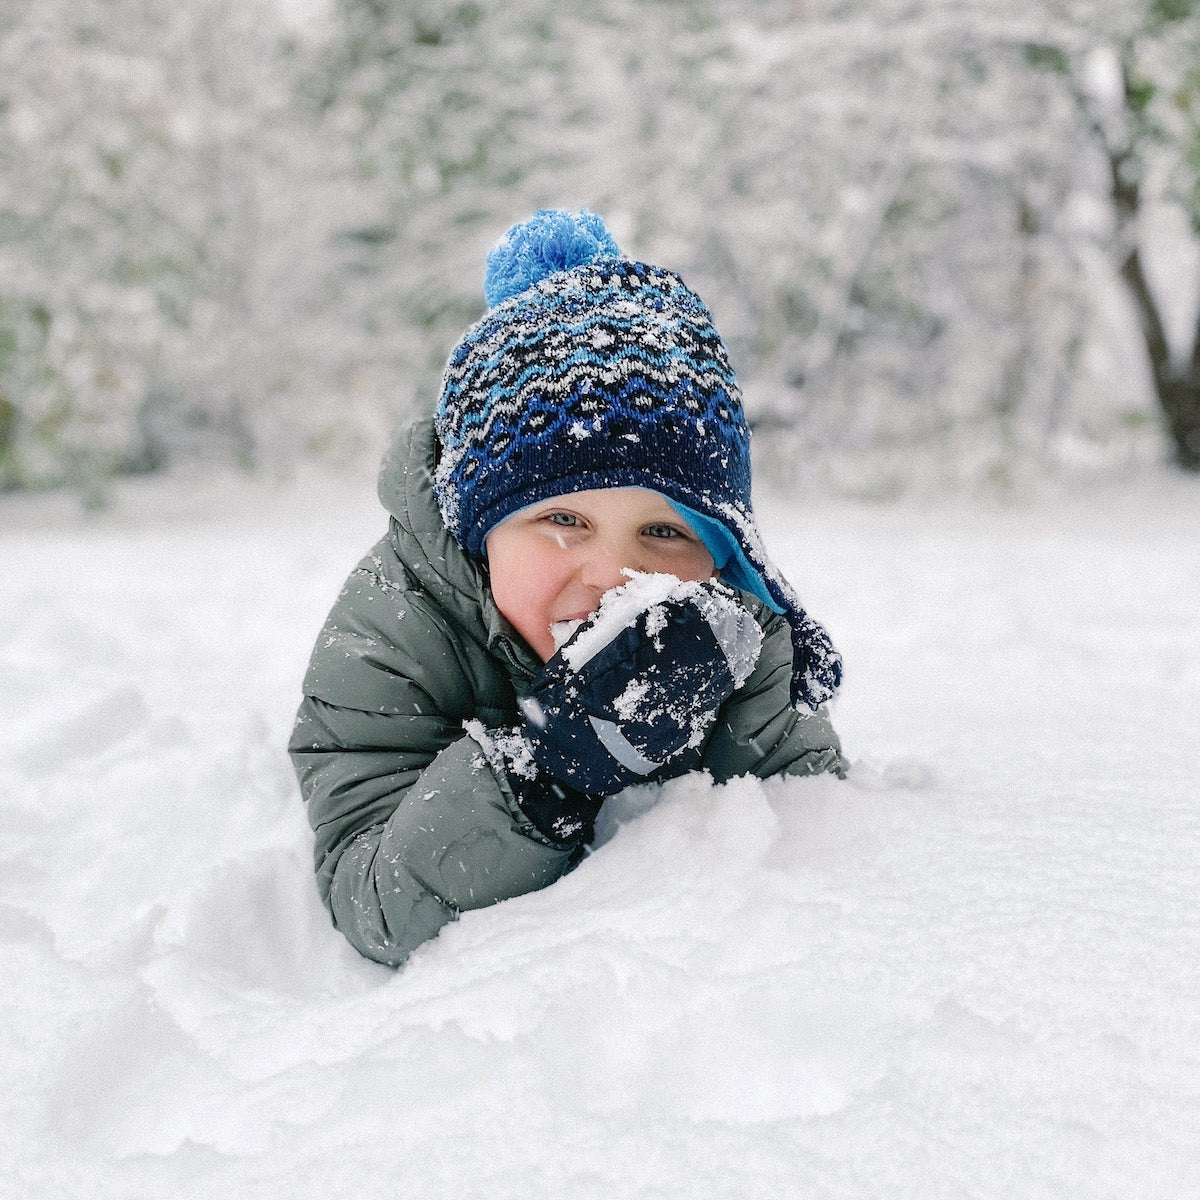 a boy sitting in a pile of snow eating snow.